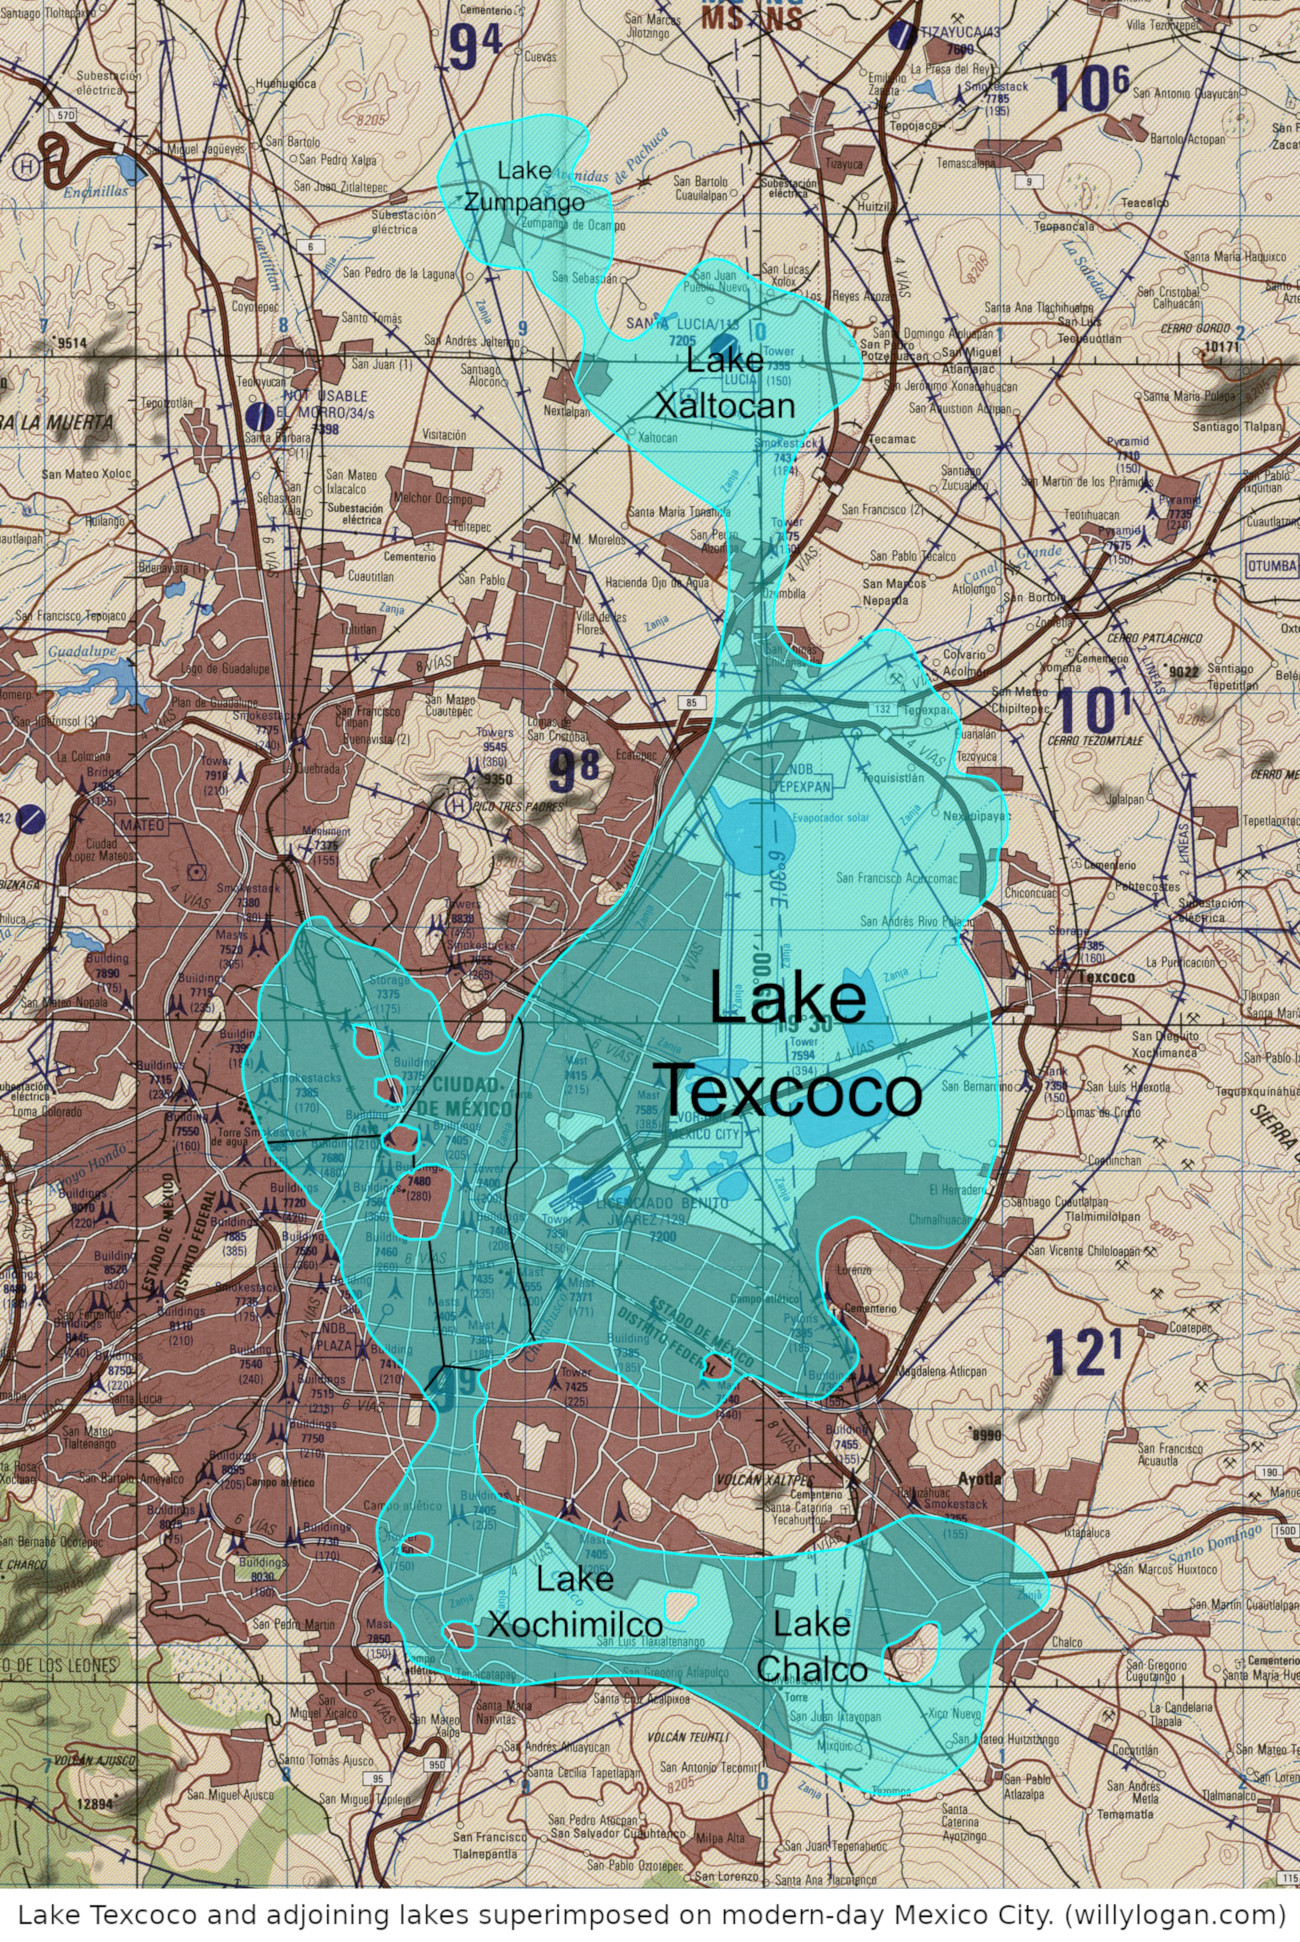 The map with the lakes labeled.